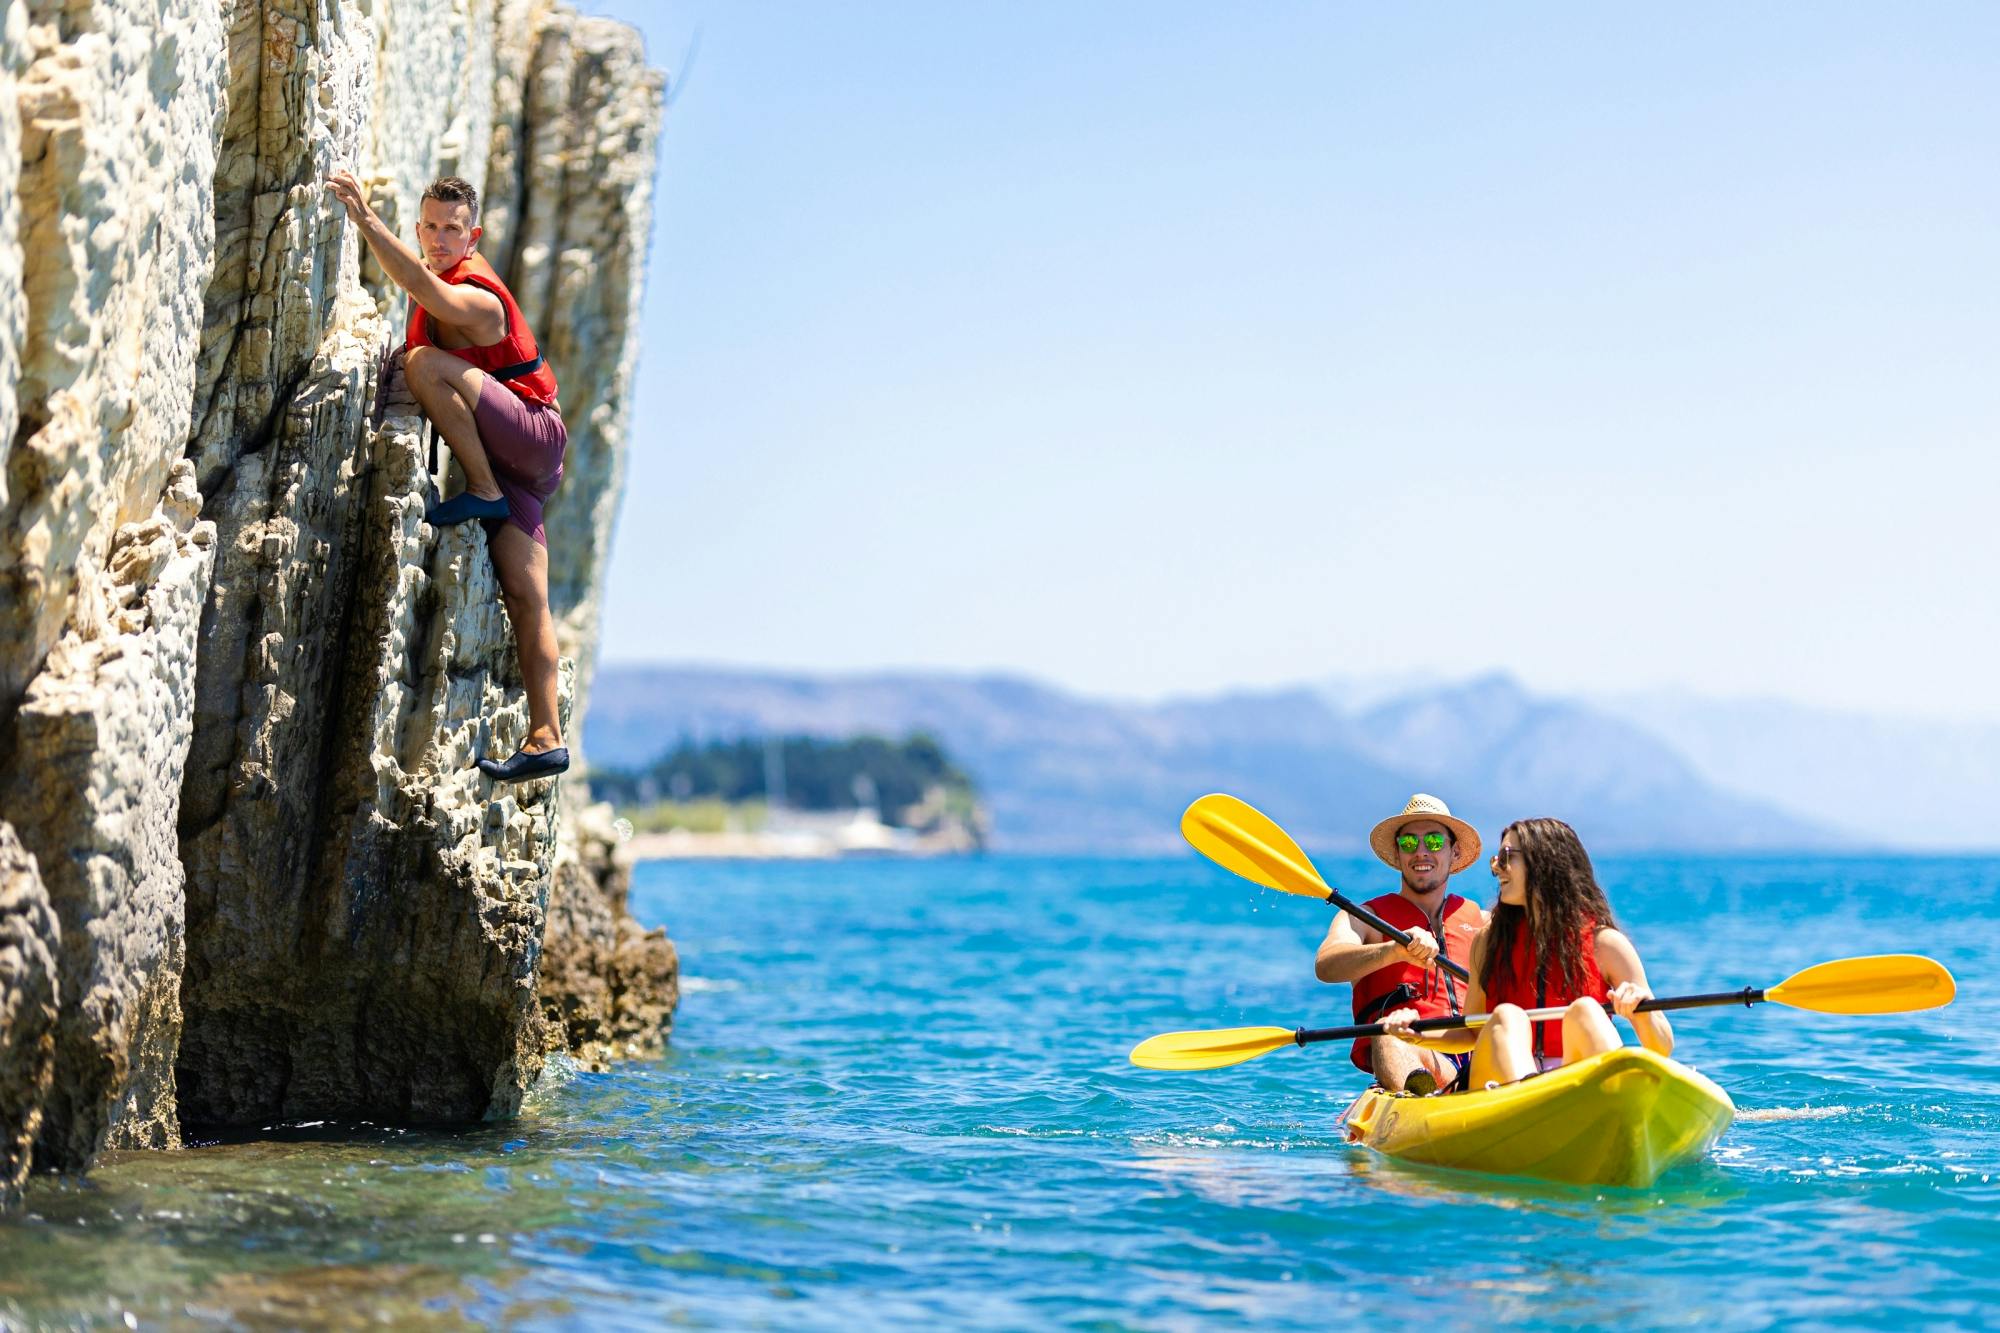 Guided kayaking tour with snorkeling stops from Split Musement